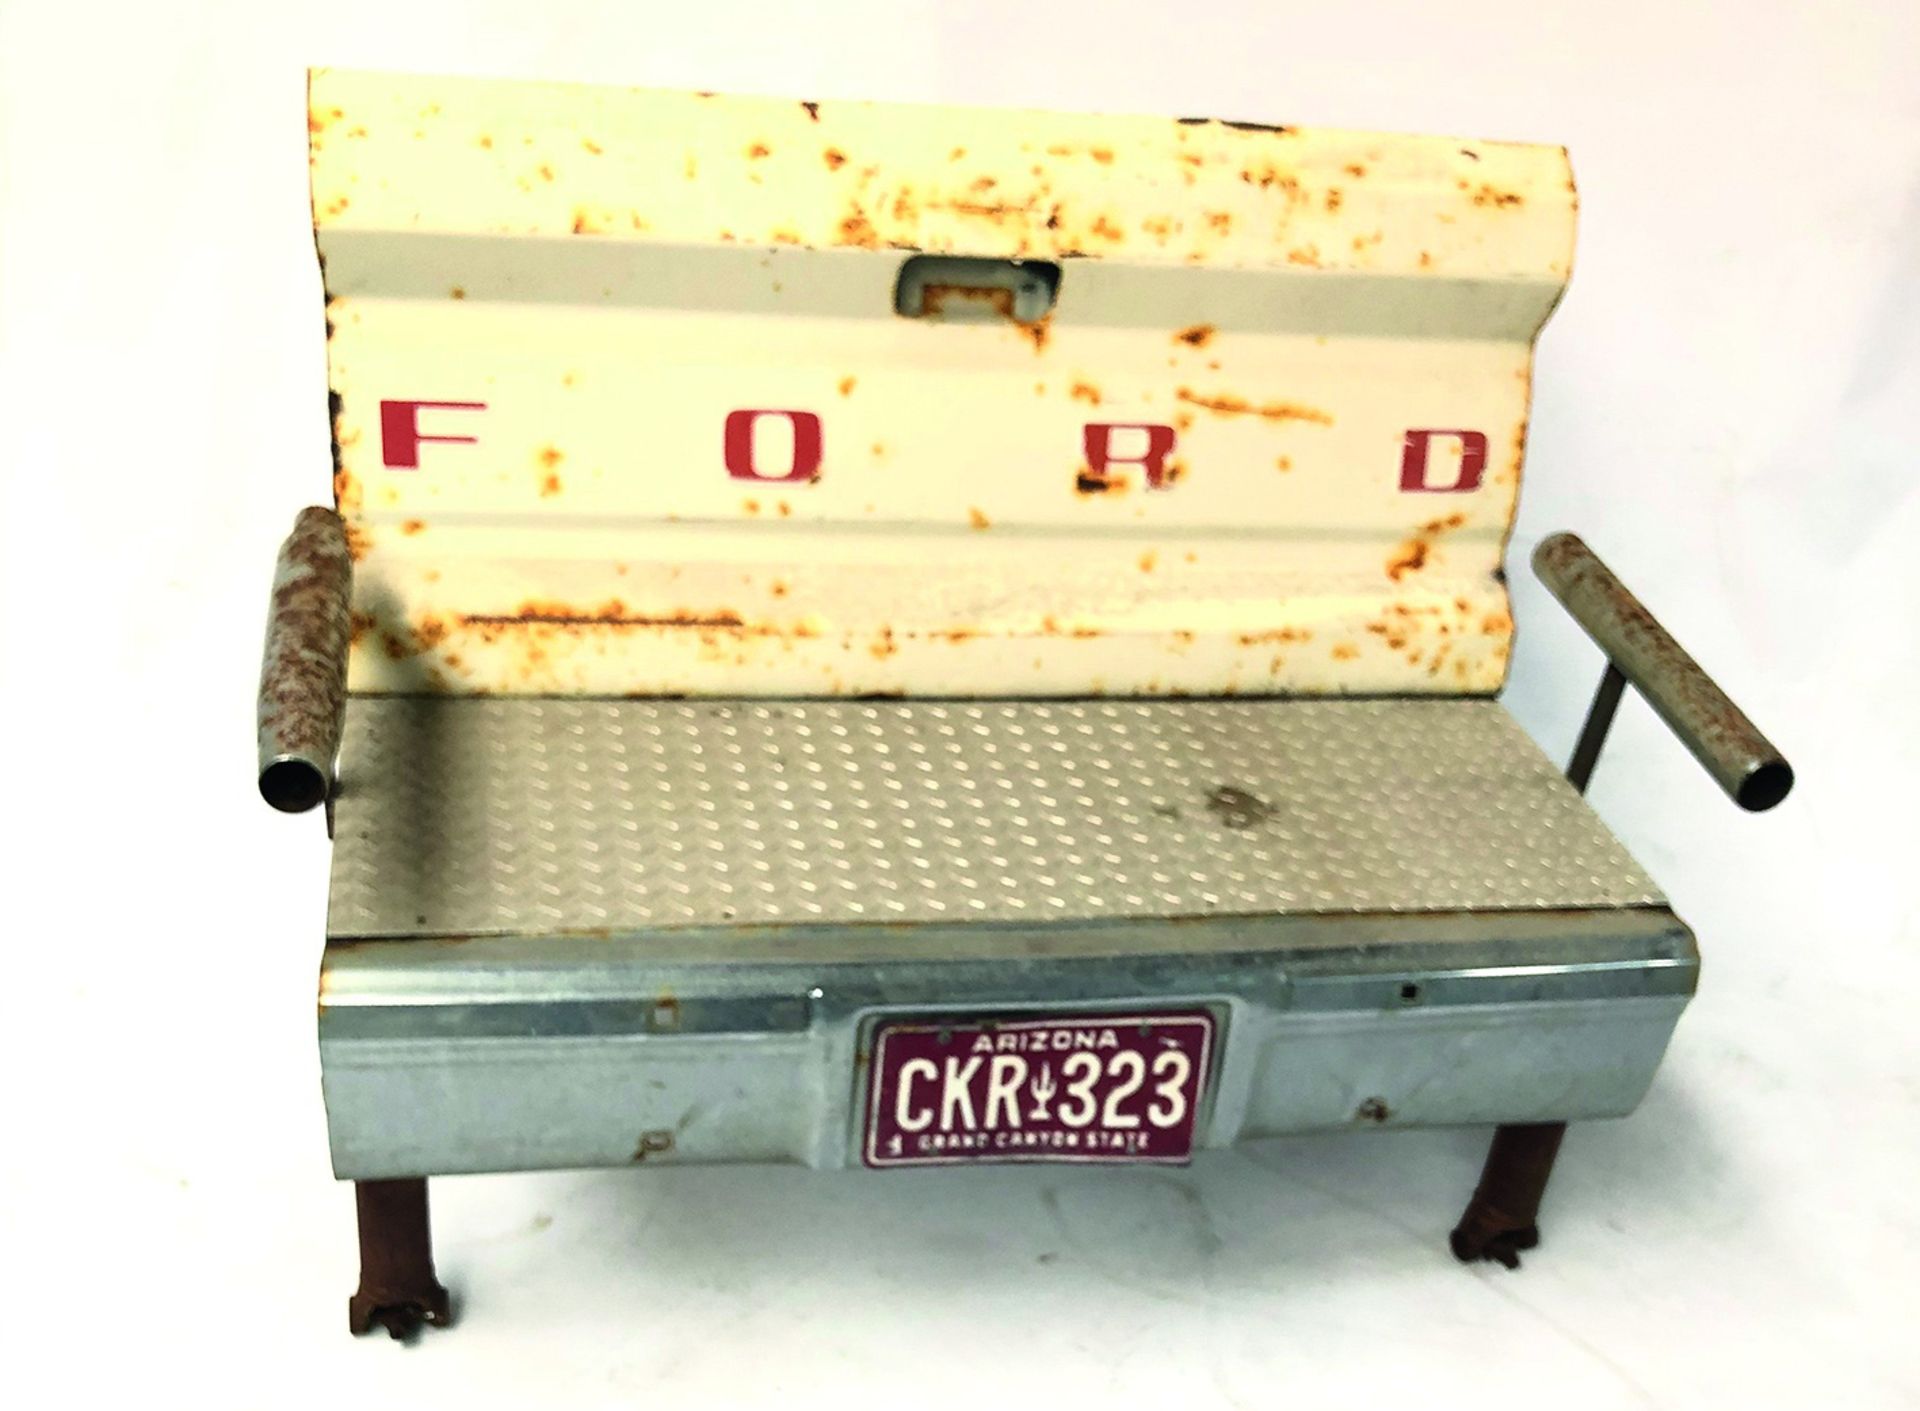 Handmade Metal Bench from Ford Pickup Parts - Image 3 of 3